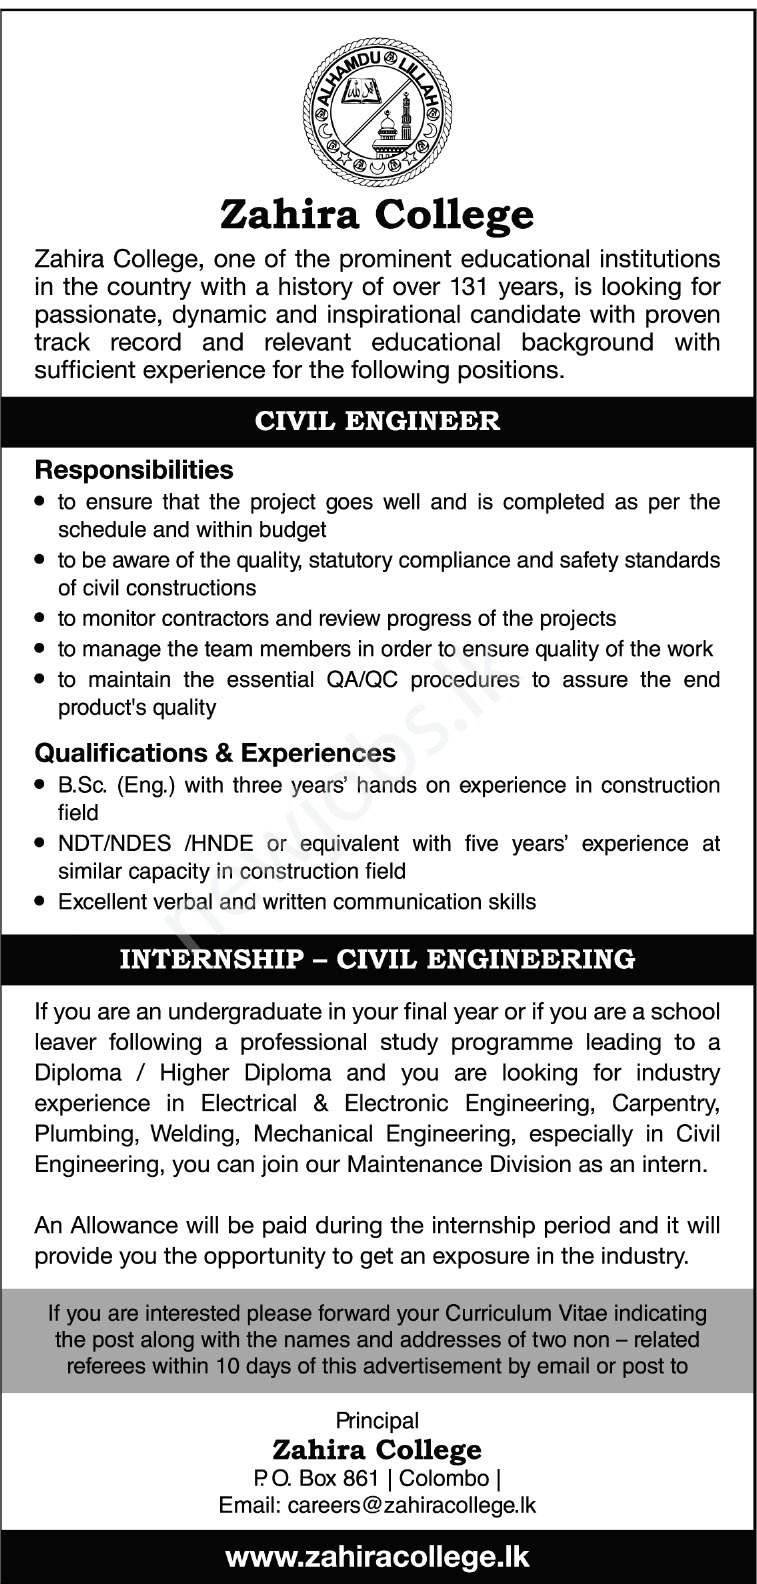 You are currently viewing Civil Engineer / Intern Civil Engineer